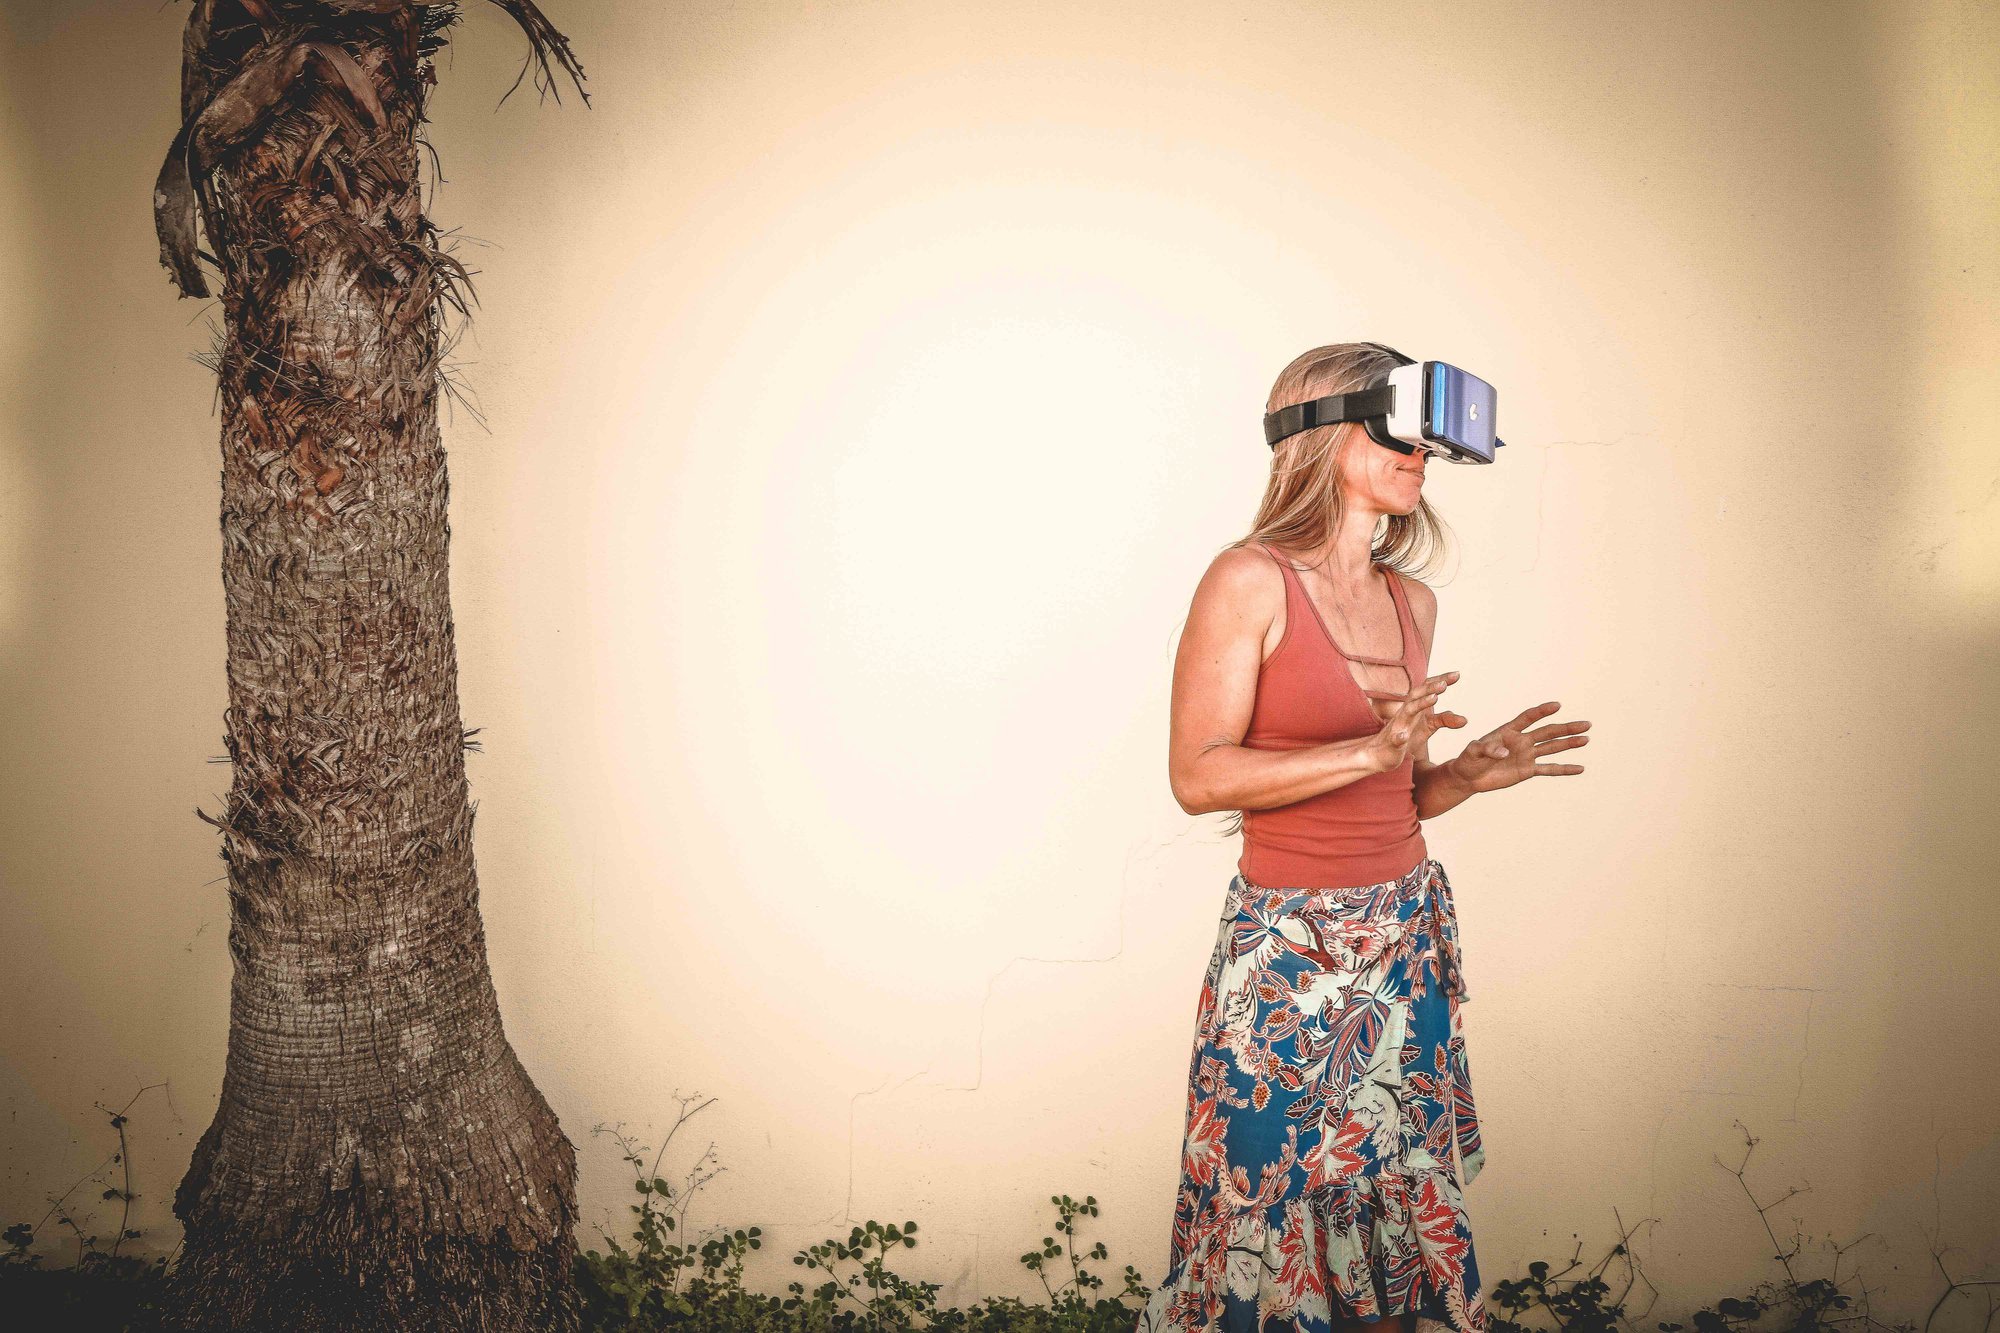 Best Uses of Virtual Reality in the Hospitality Industry